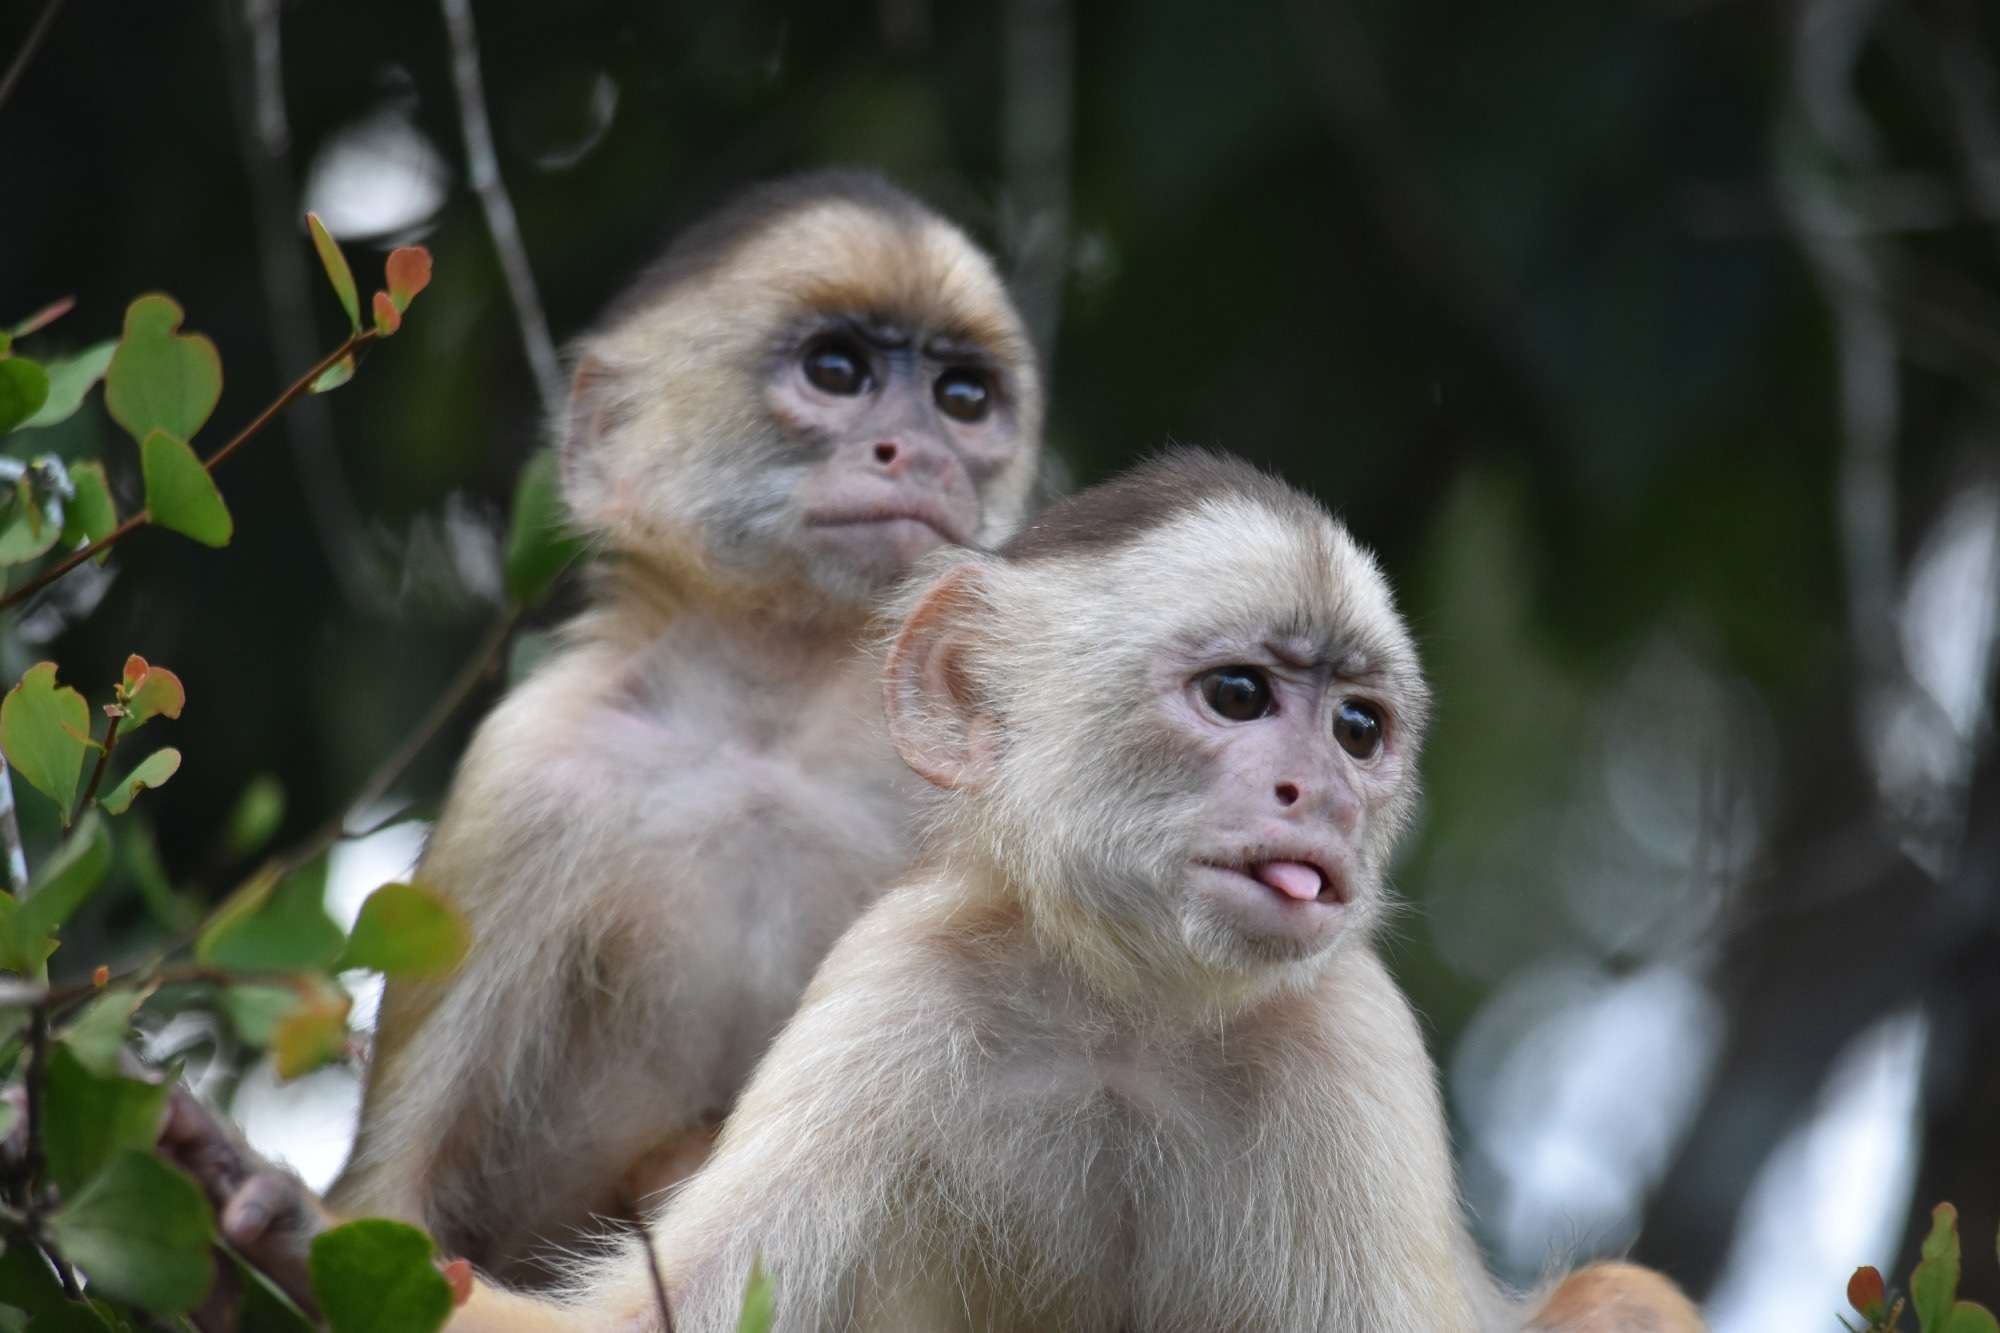 New research reveals the genetic diversity and evolutionary history of primates